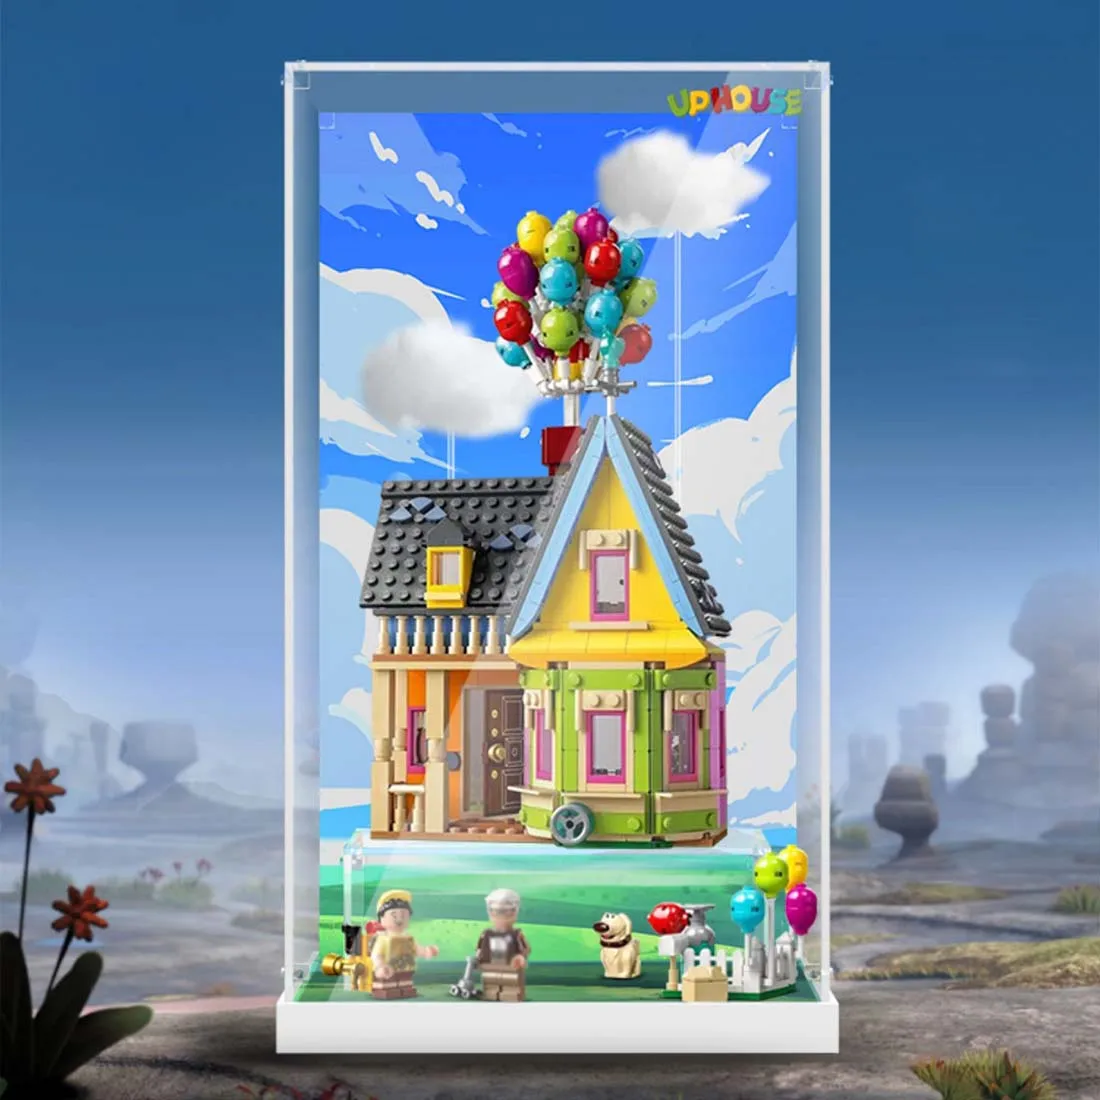 3mm Acrylic Display Case For Lego 43217 Flying Balloon Up House Building Blocks - £77.31 GBP